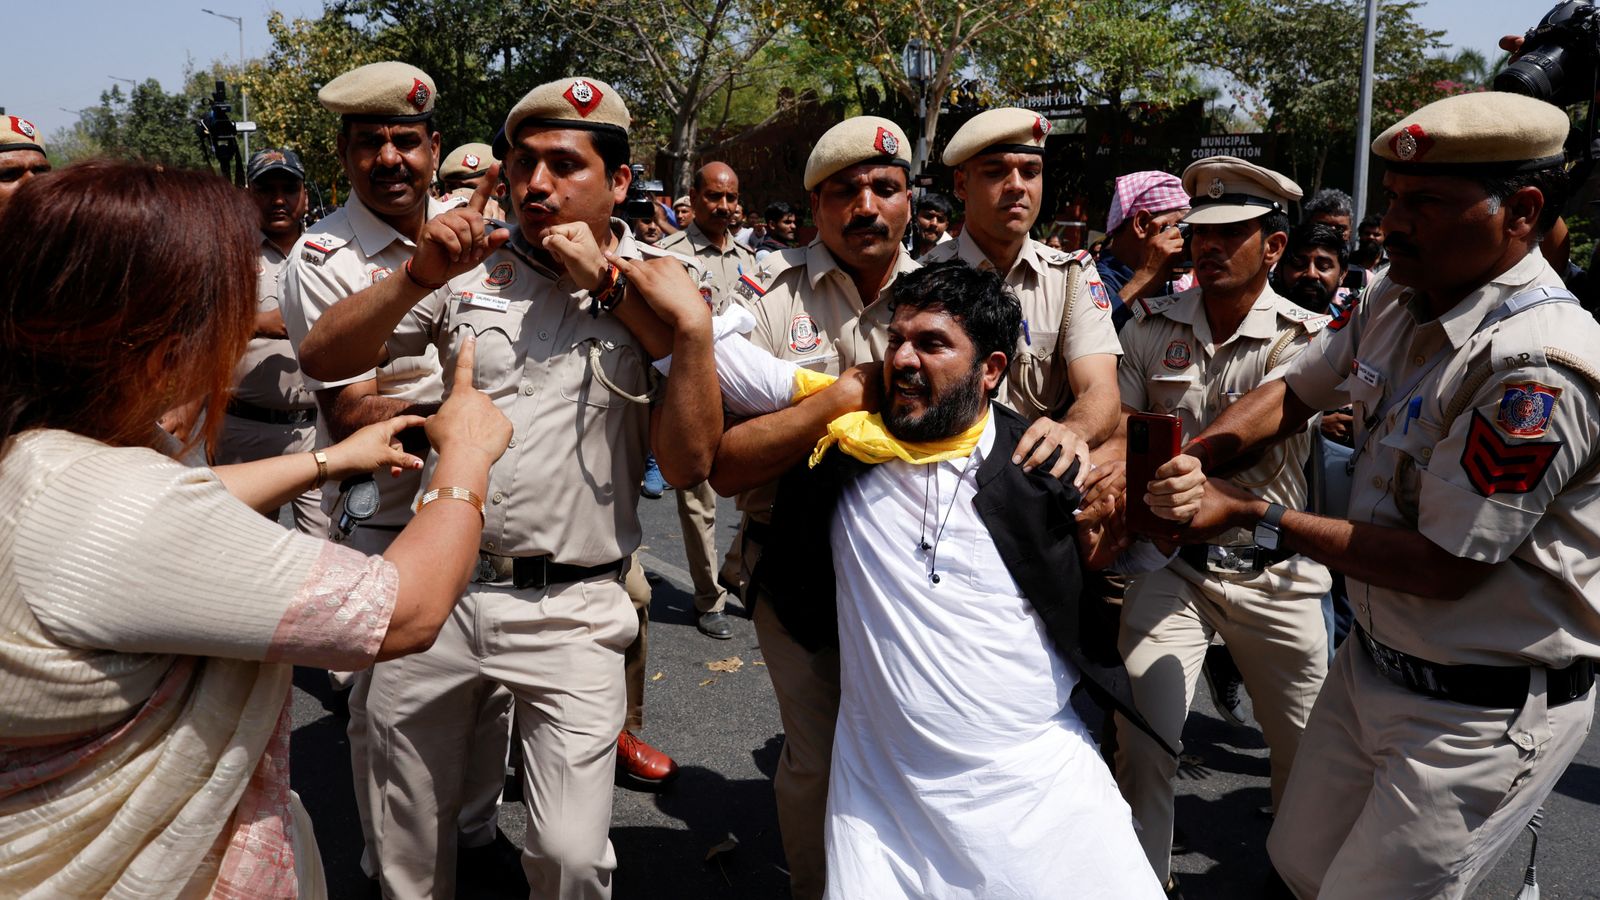 Arvind Kejriwal detained: Protesters demand release of rival to Indian leader Narendra Modi